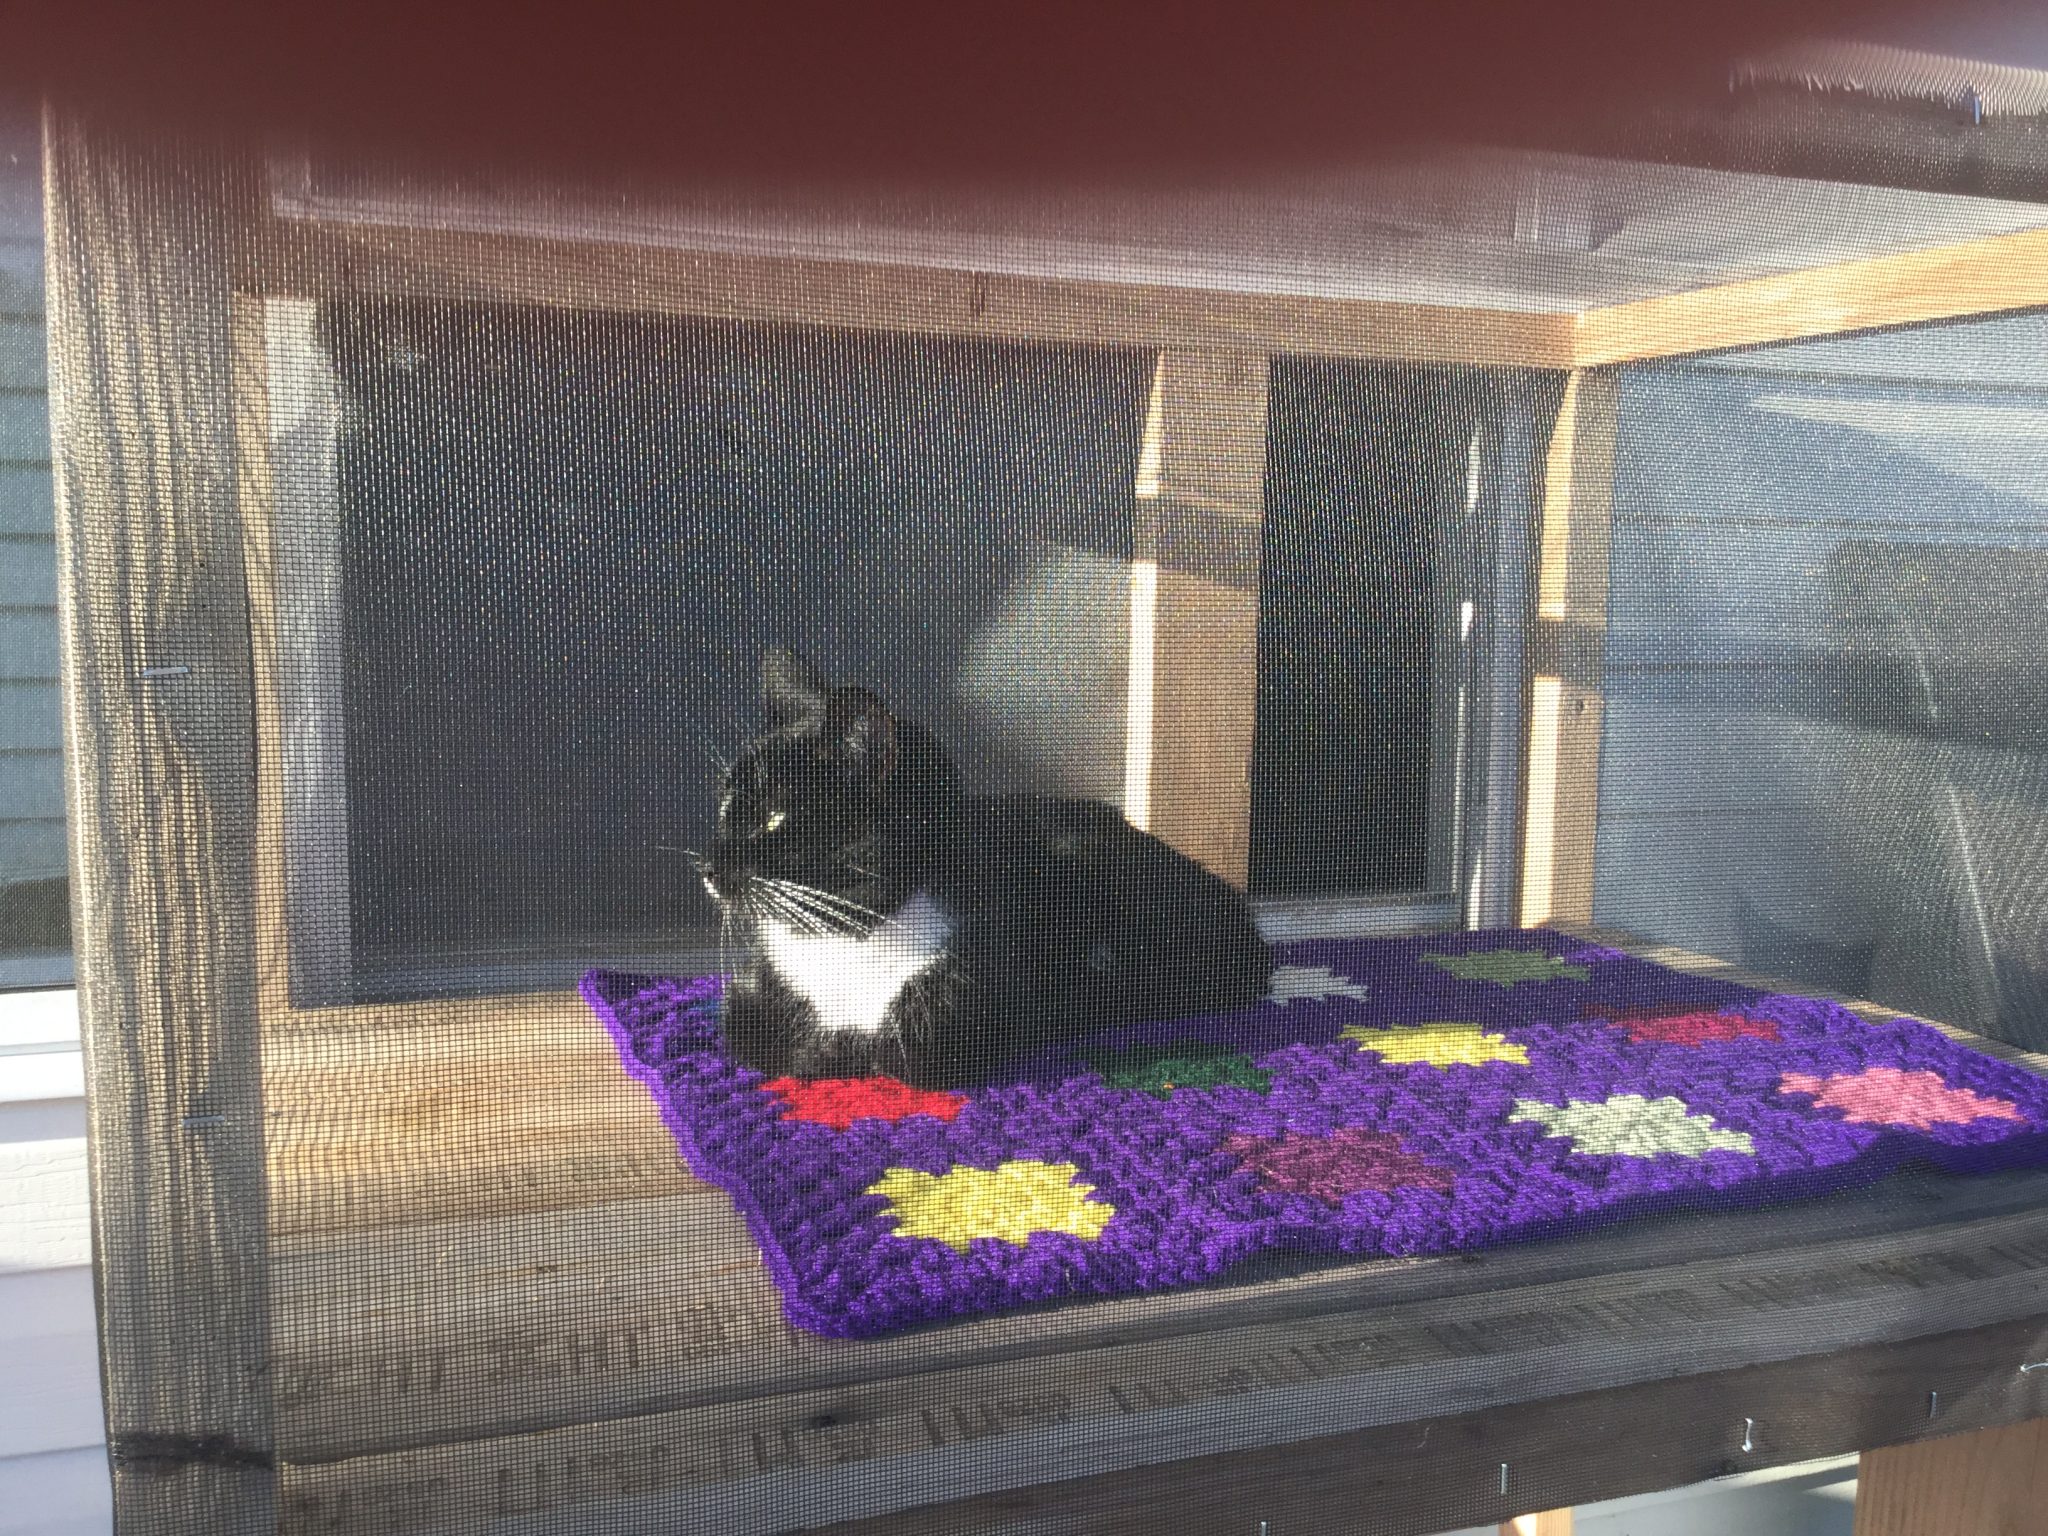 Cat sits on catio in sunshine